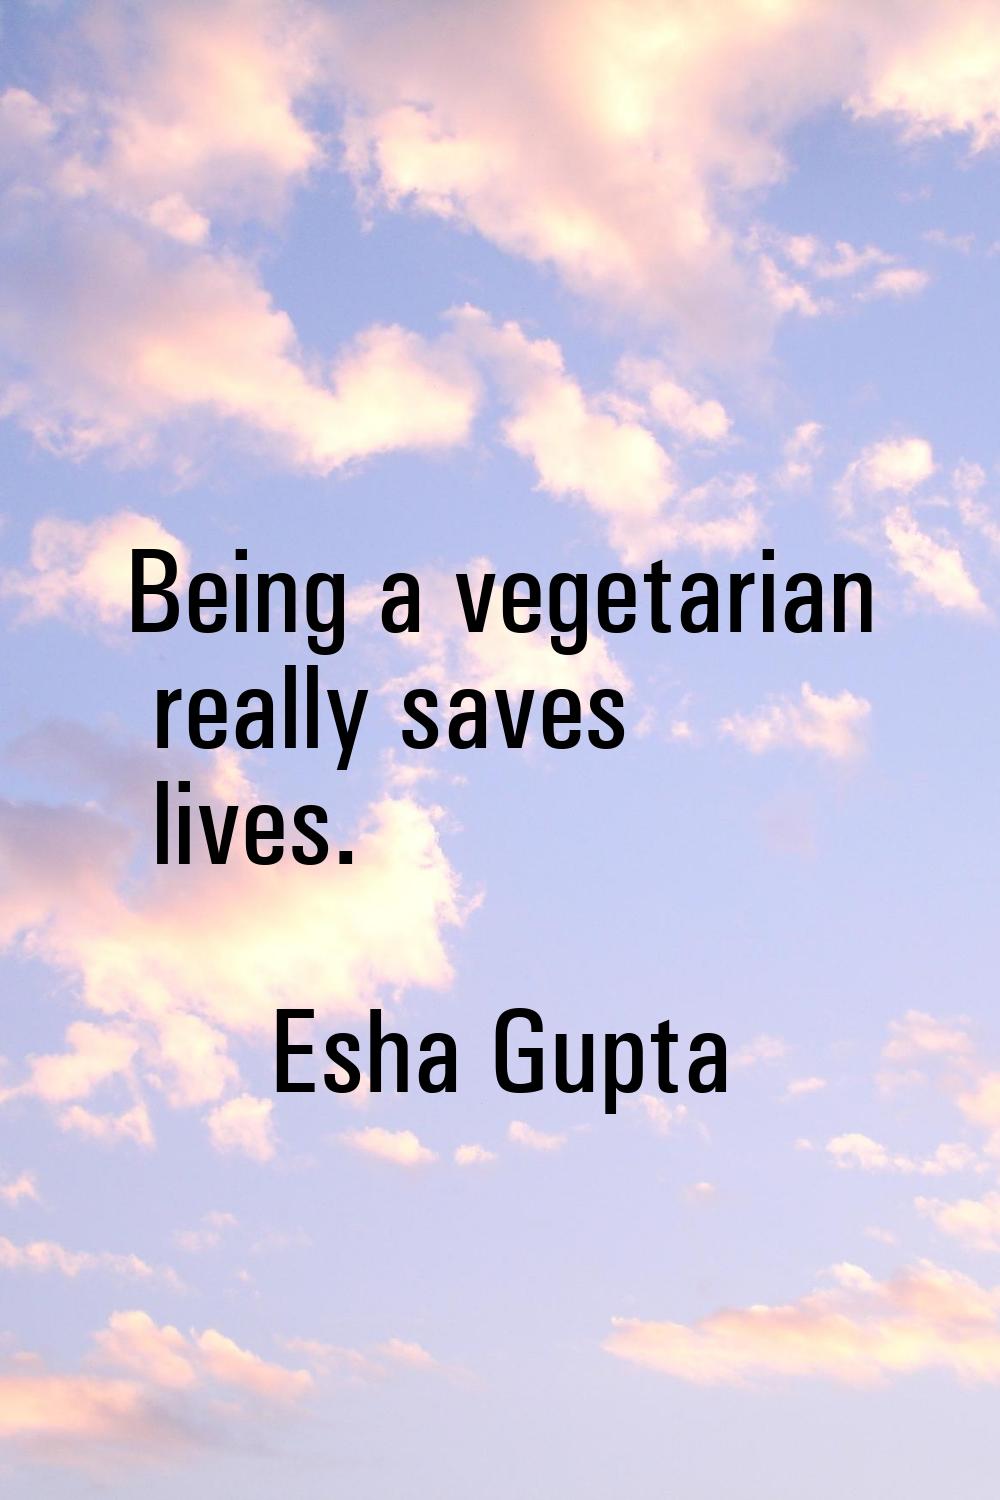 Being a vegetarian really saves lives.